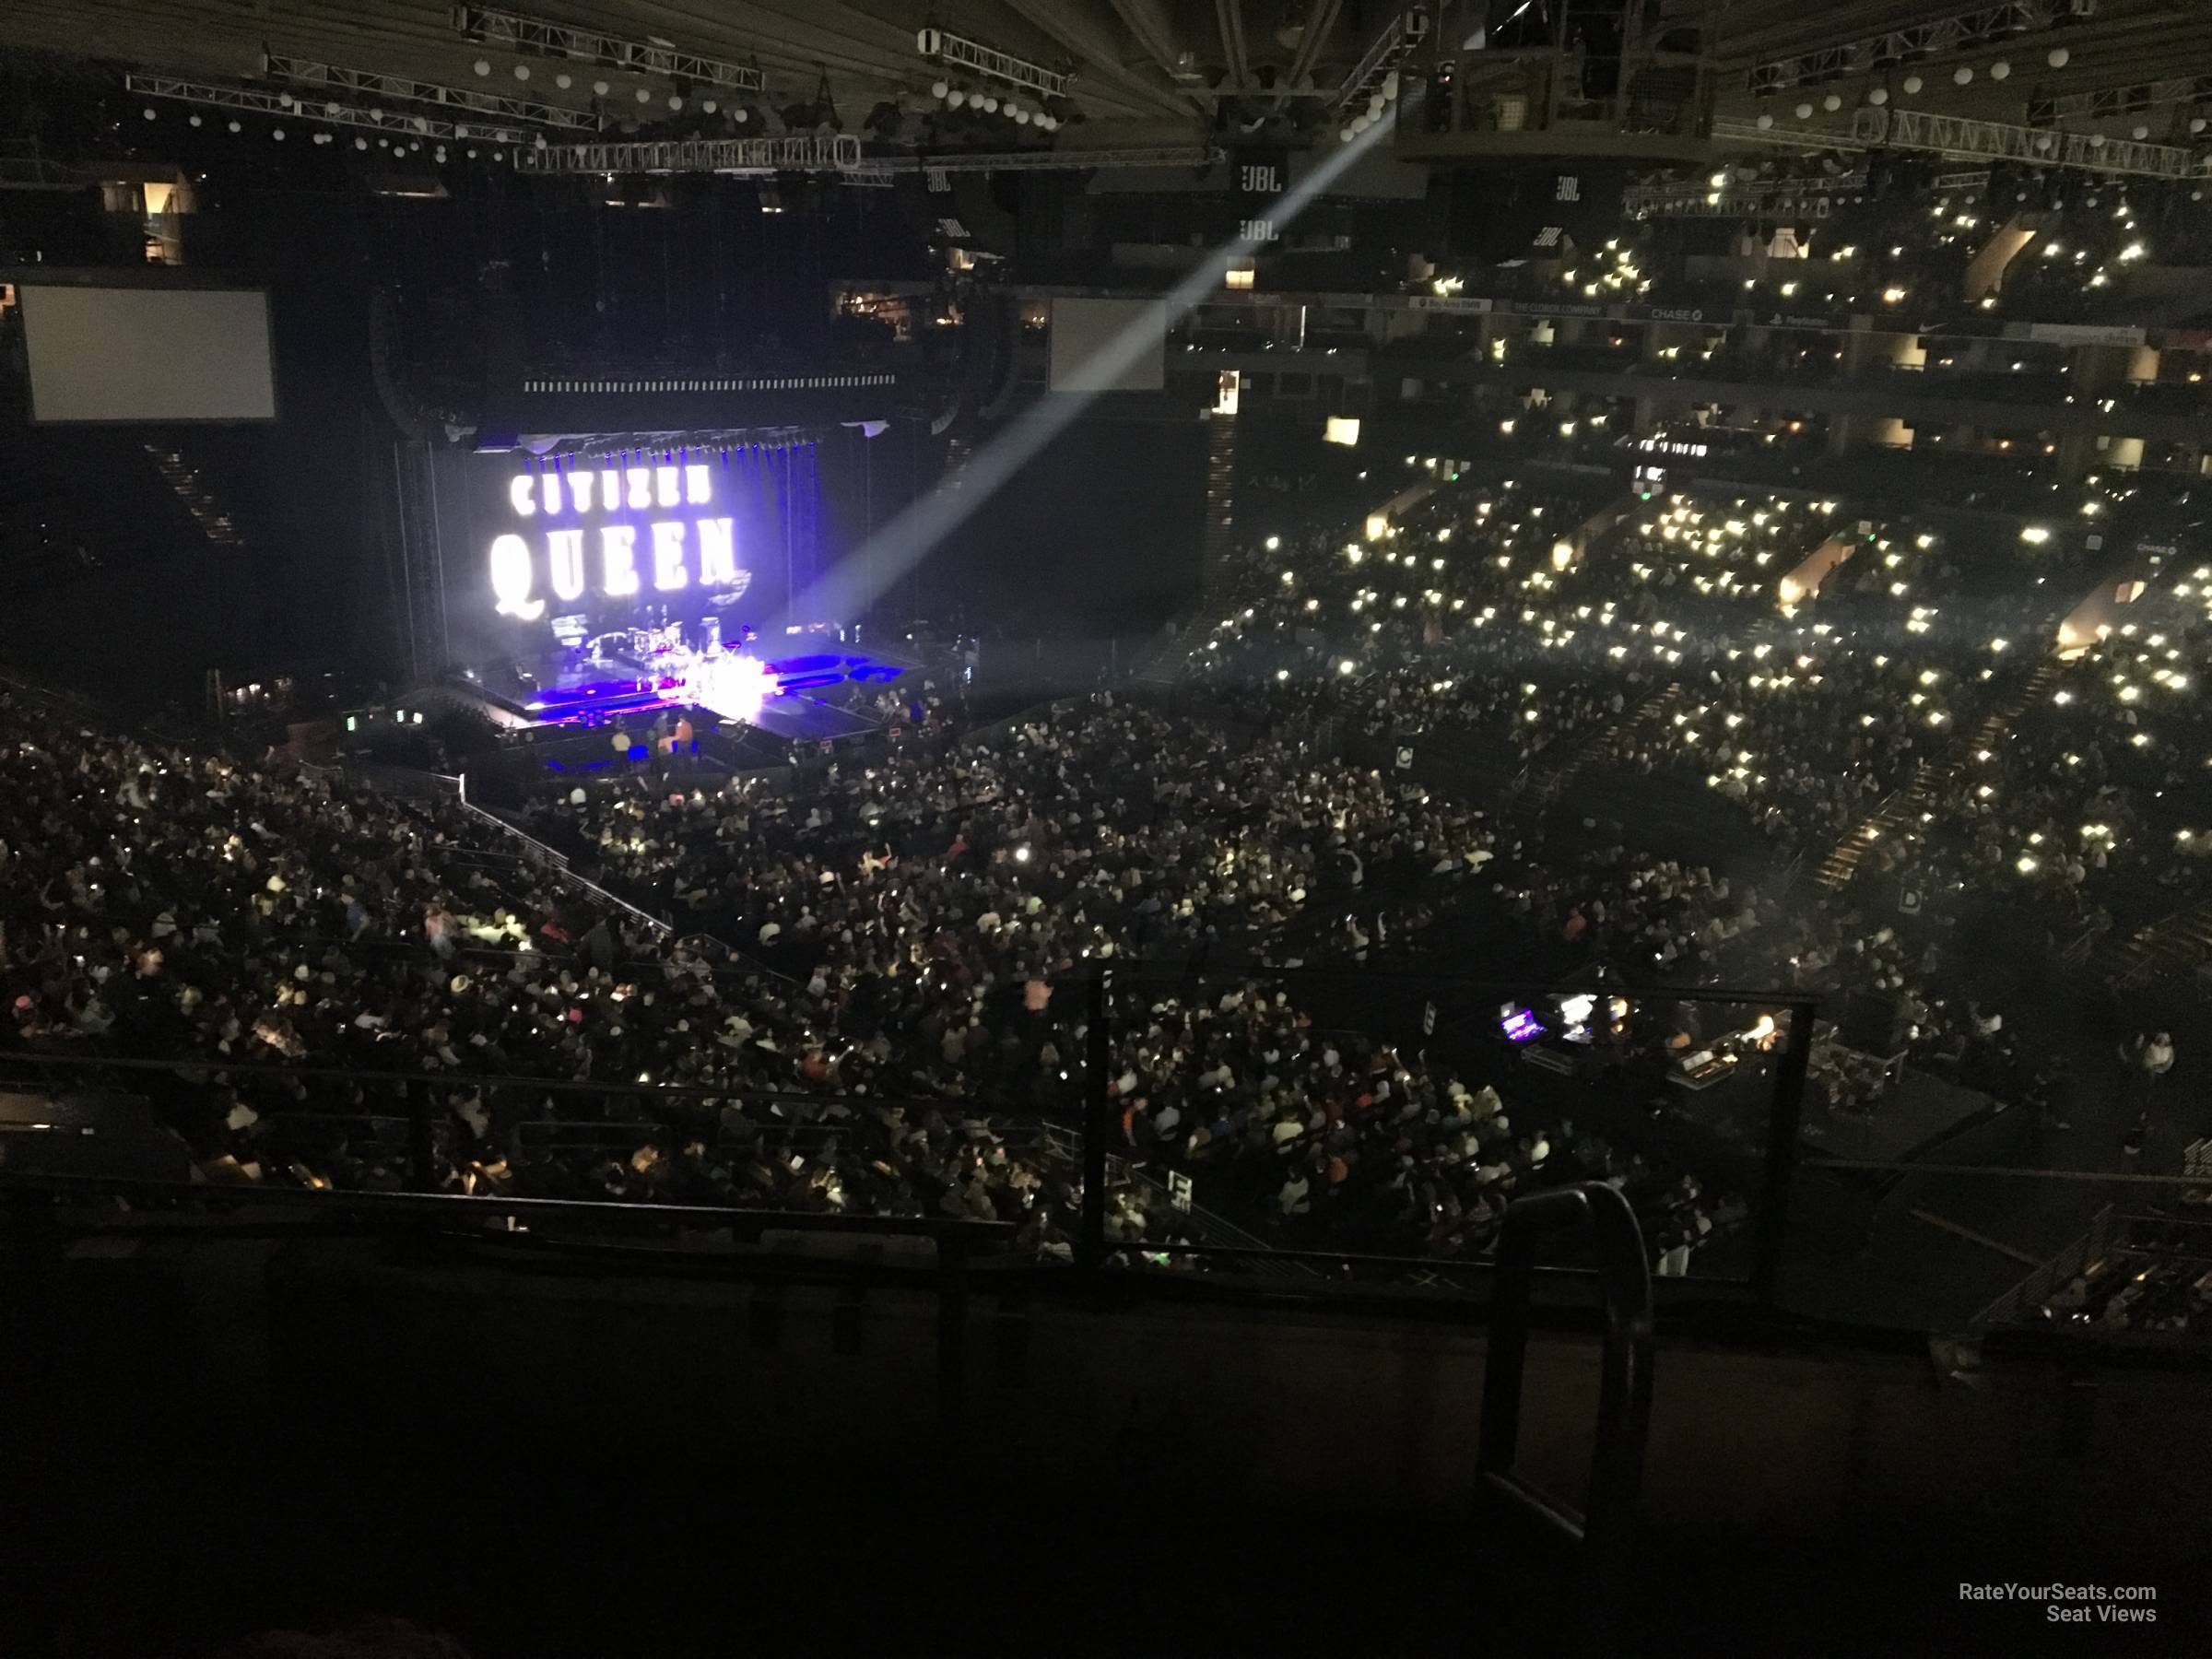 section 213, row 3 seat view  - oakland arena